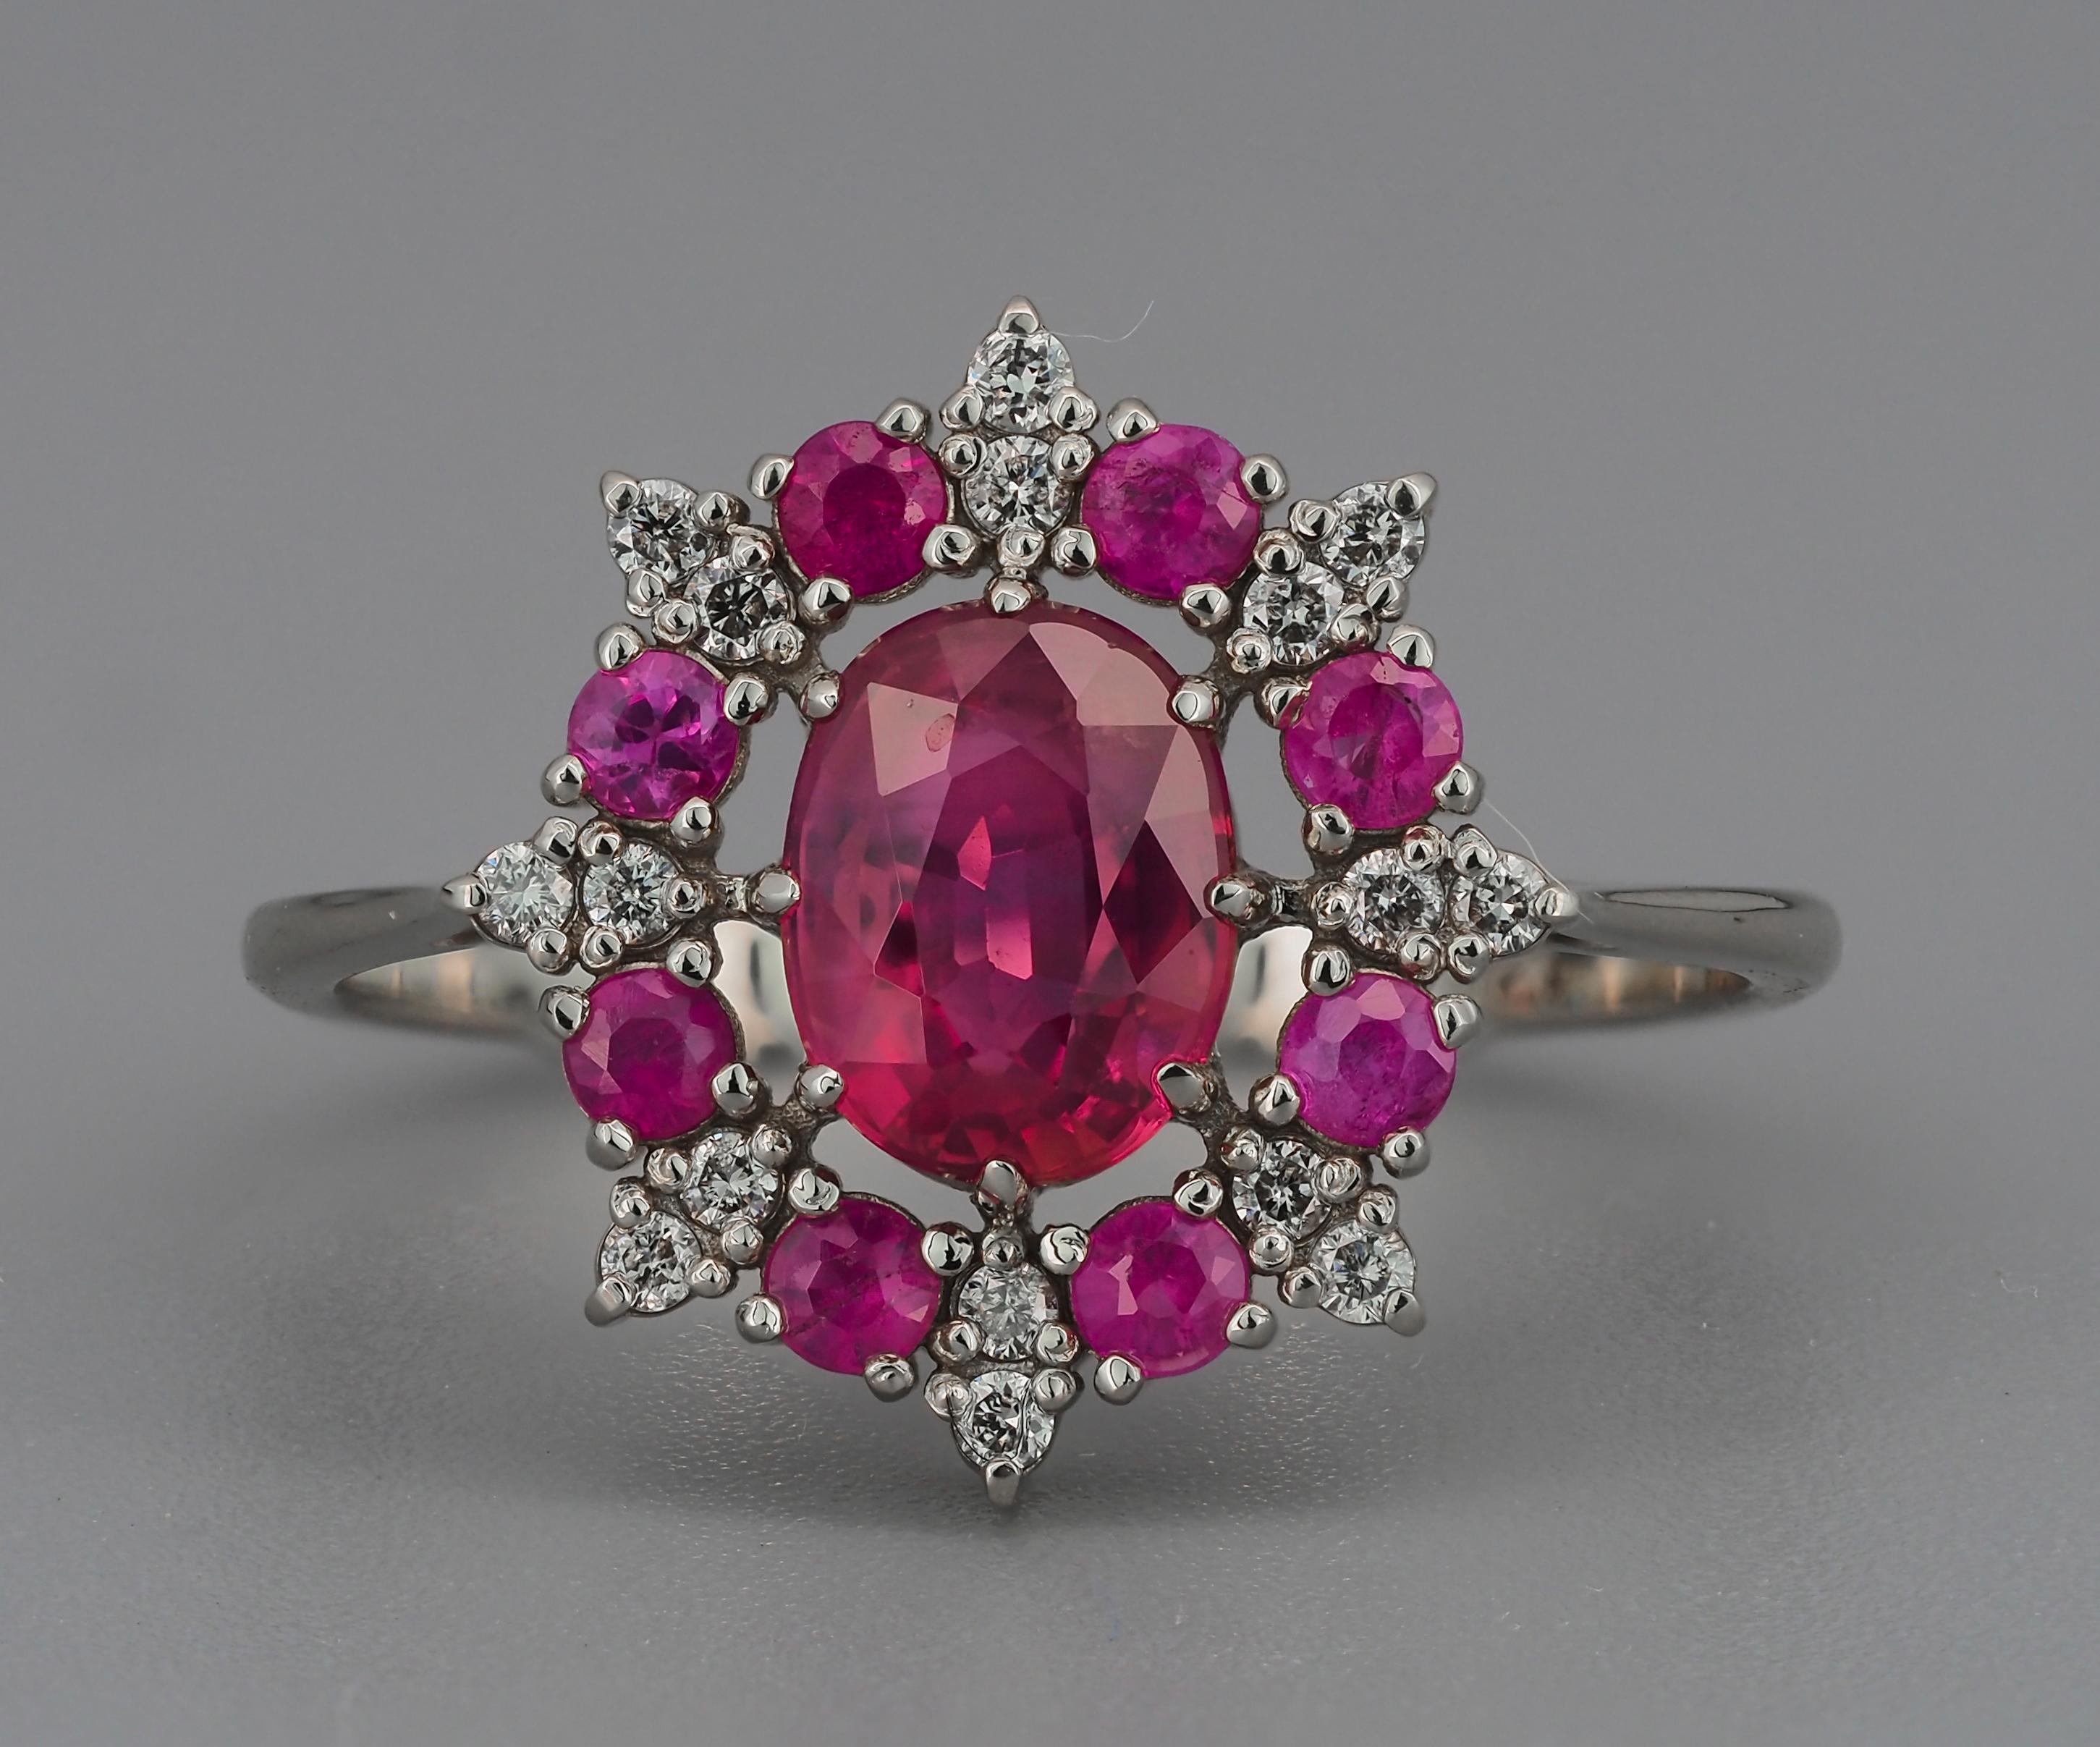 Statement ruby ring. 
Ruby, diamonds 14k gold ring. Cocktail ruby ring. Oval ruby ring. Genuine ruby ring. July birthstone ring.

Material: 14k gold
Total Weight: 2.7 g. depends from size.

Set with ruby: oval cut ruby -pinkish-red color, 1.5 ct